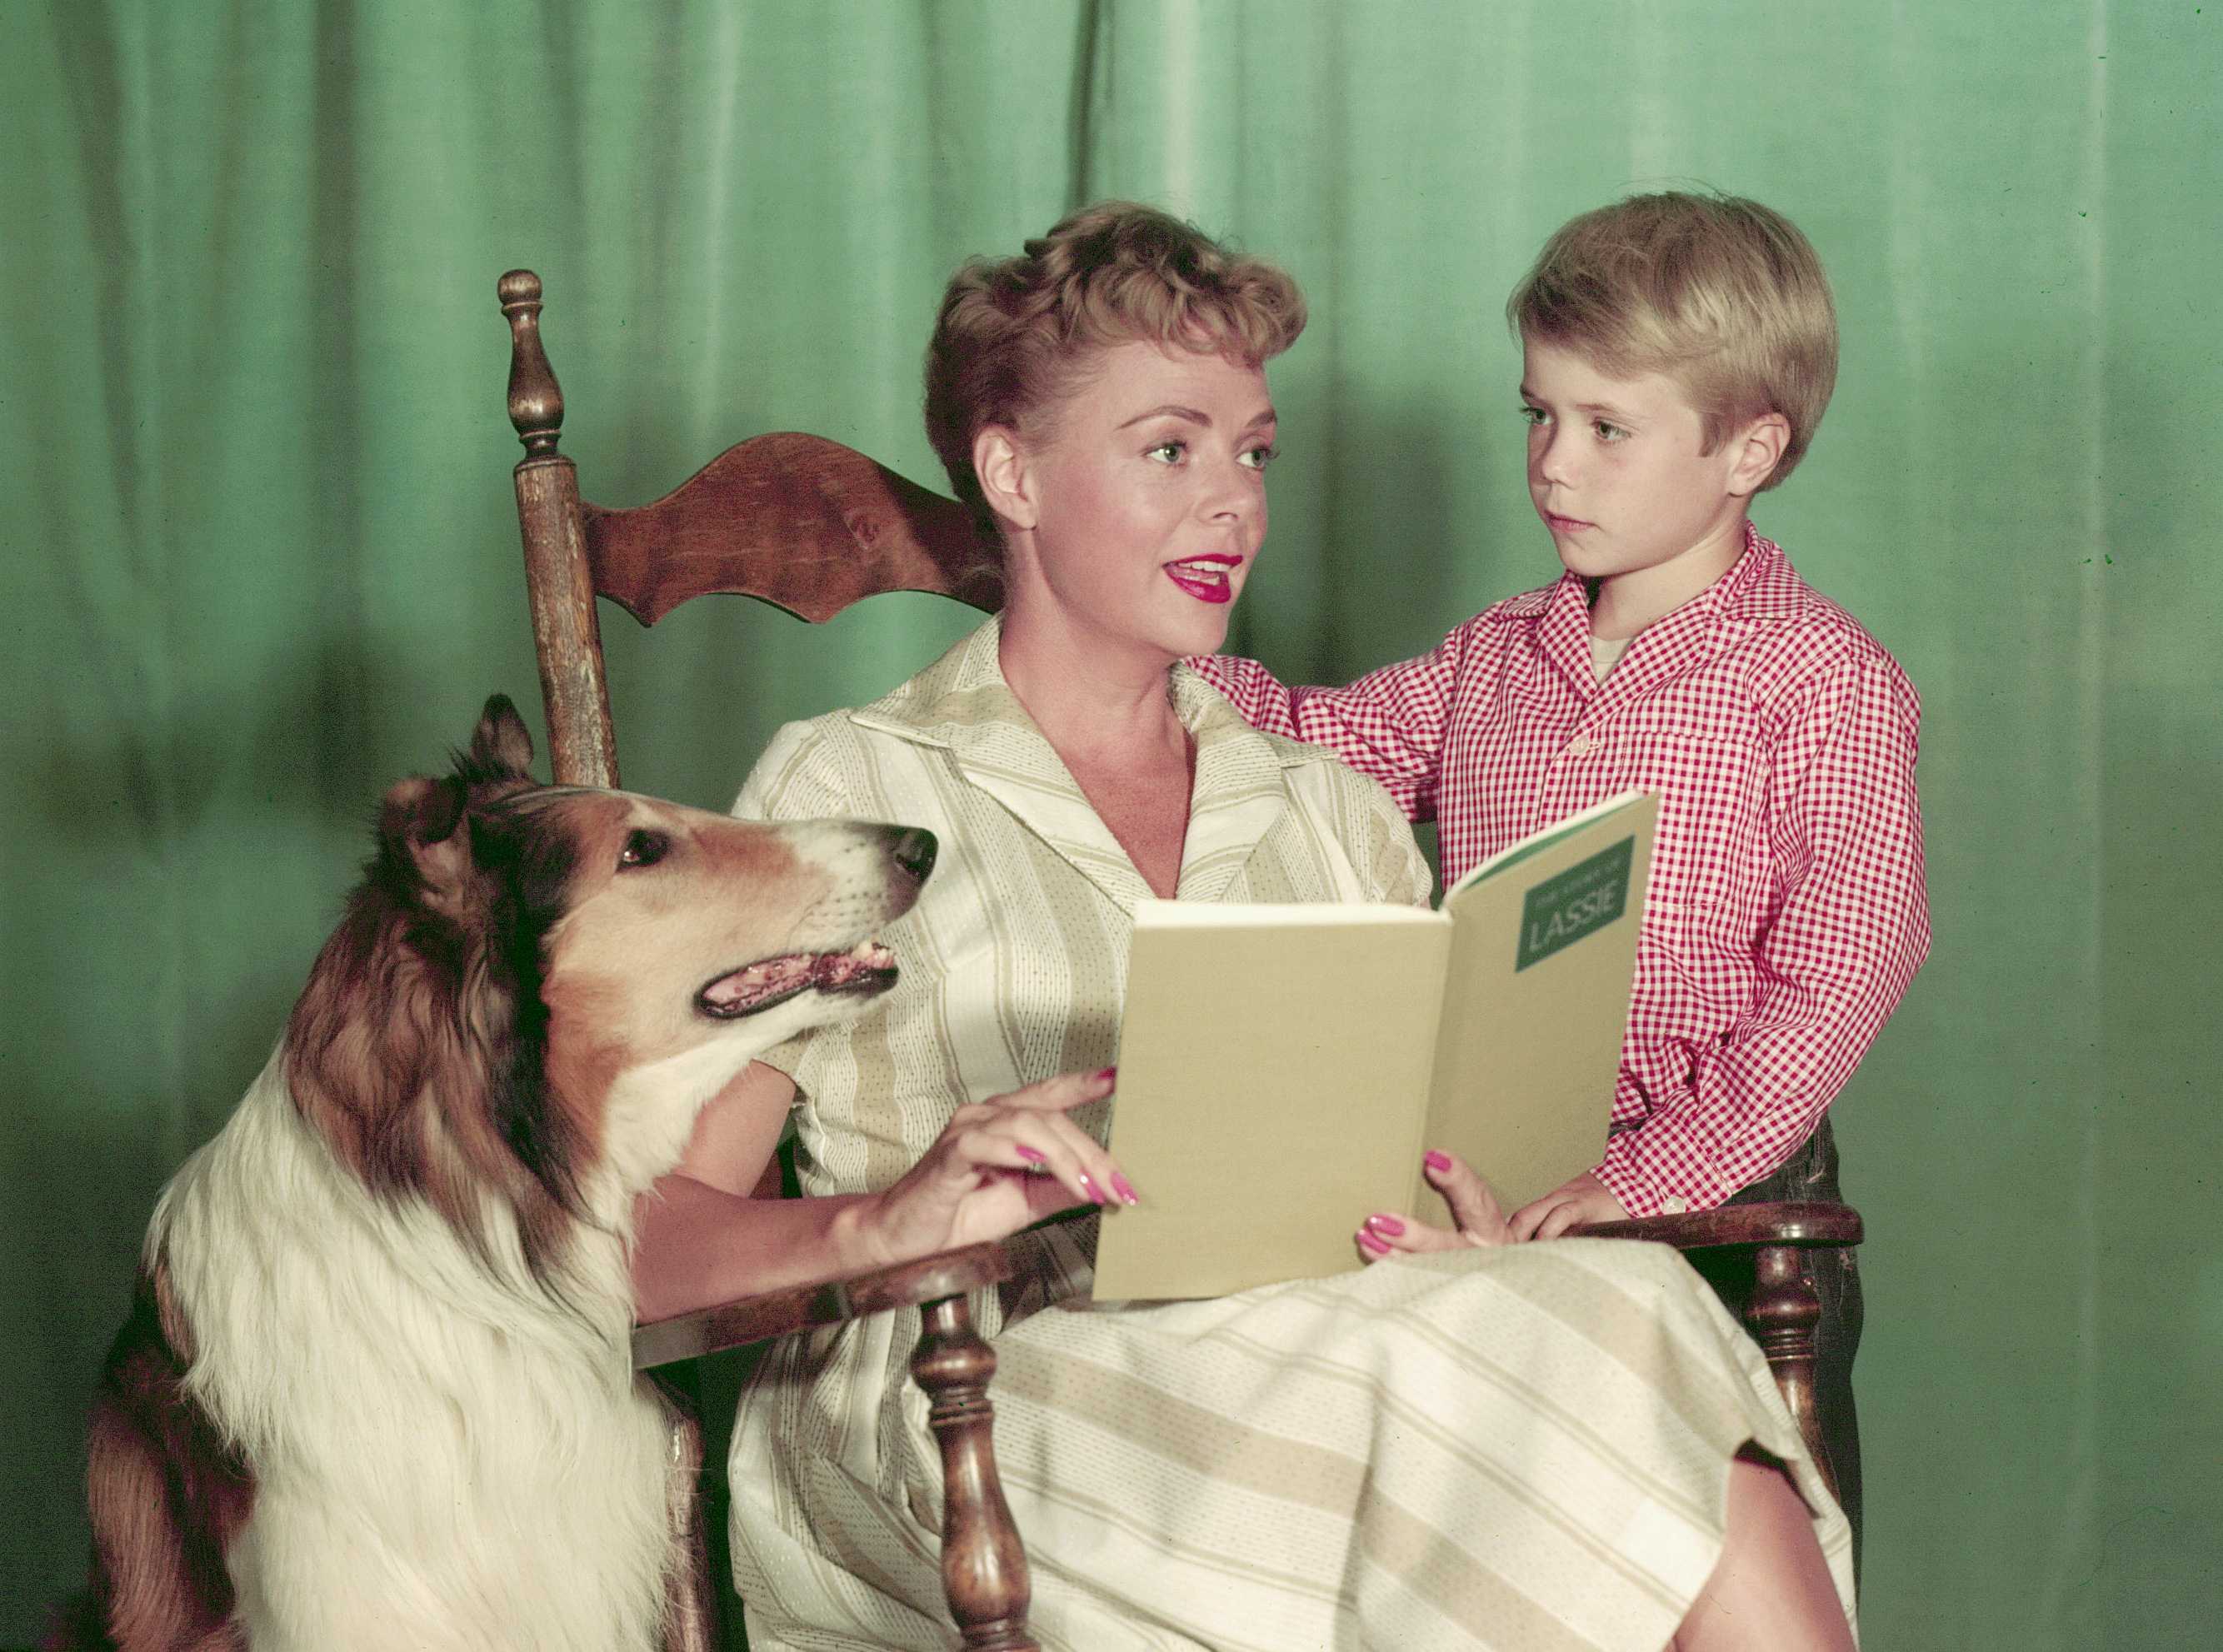 June Lockhart and Jon Provost on "Lassie" in 1960 | Source: Getty Images